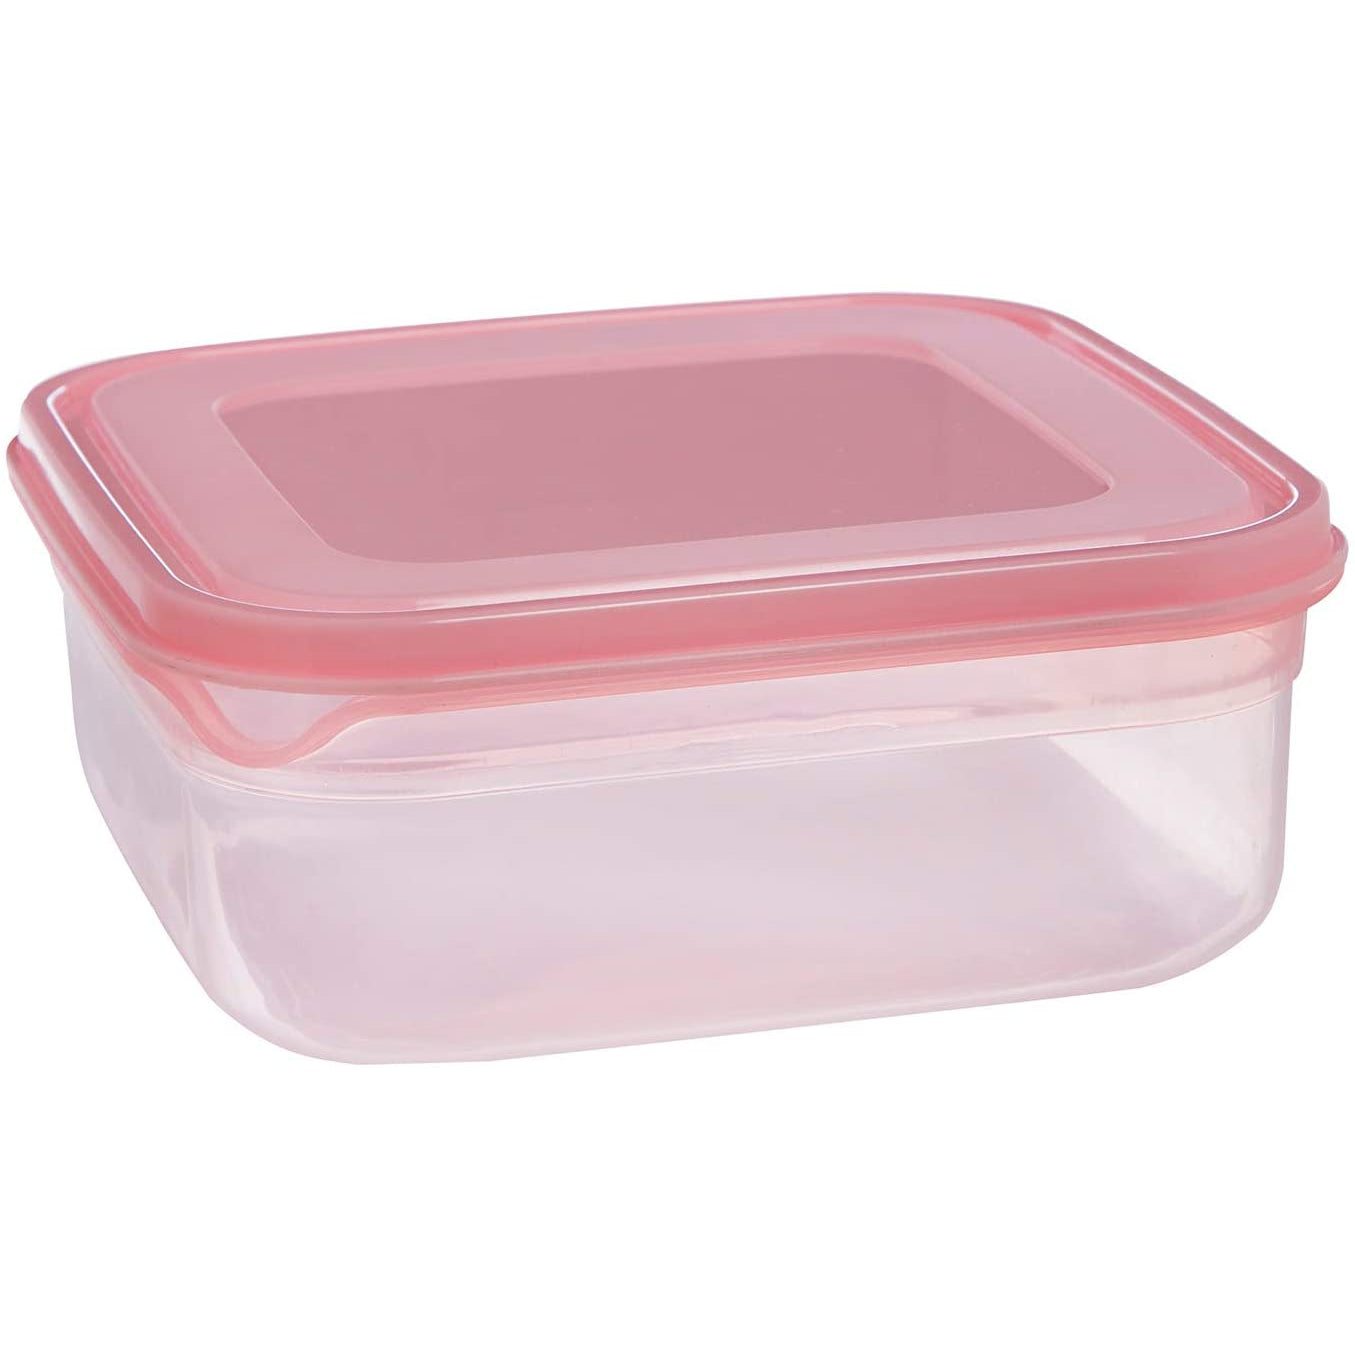 Stay Sweet Pink Combo Lunch Set | Sequin Embellished Lunch Bag and 6.25" Square Food Container